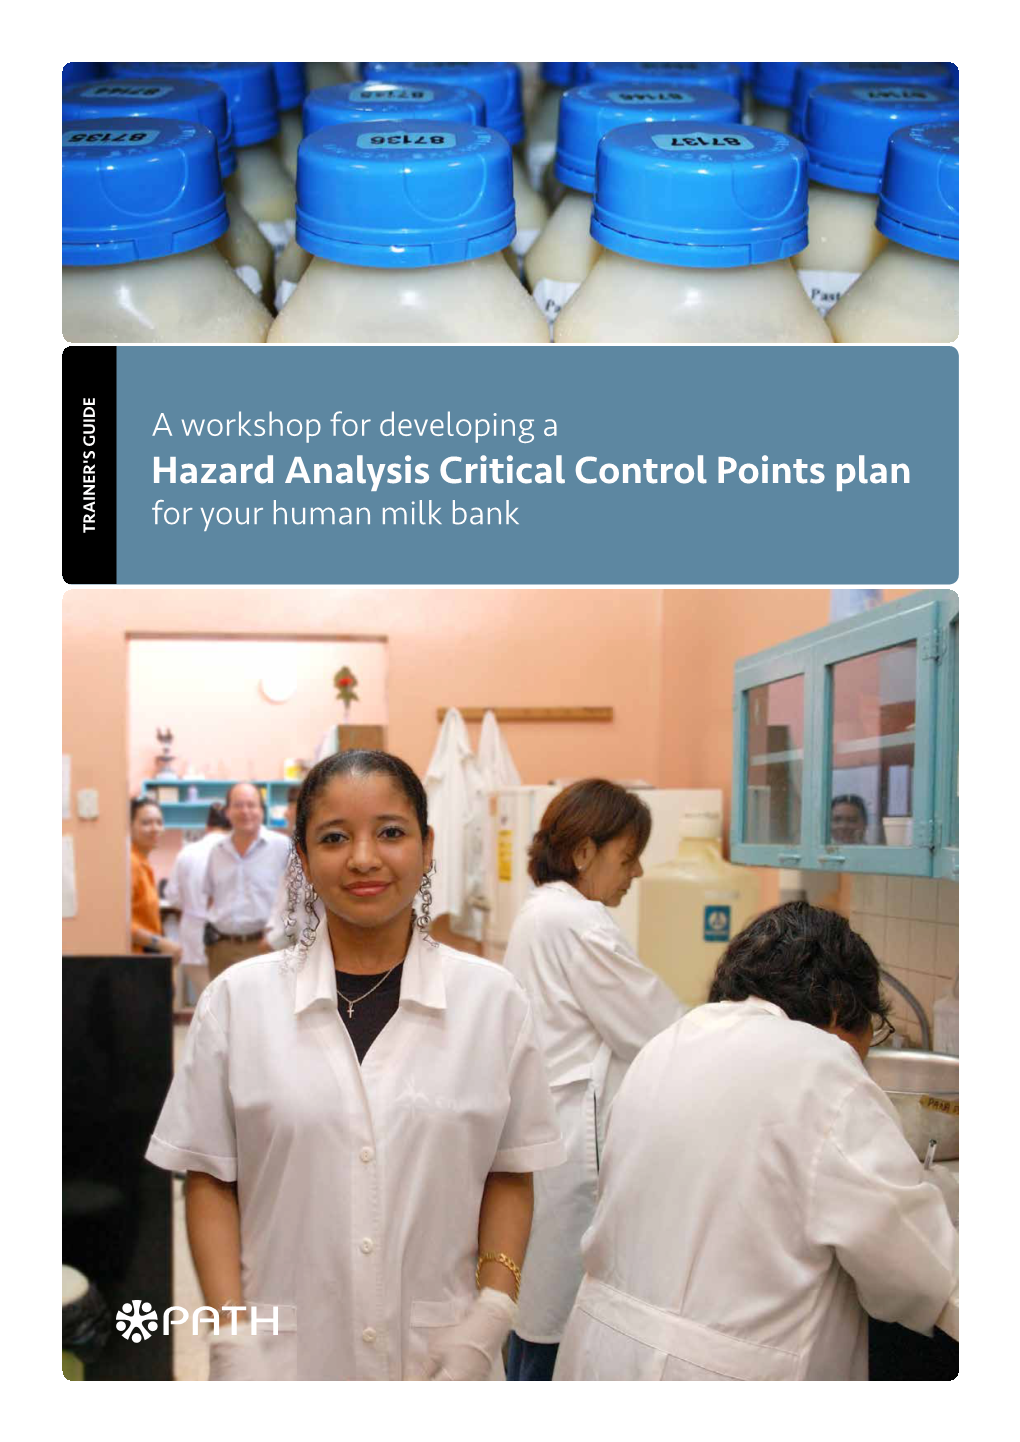 A Workshop for Developing a Hazard Analysis Critical Control Points Plan